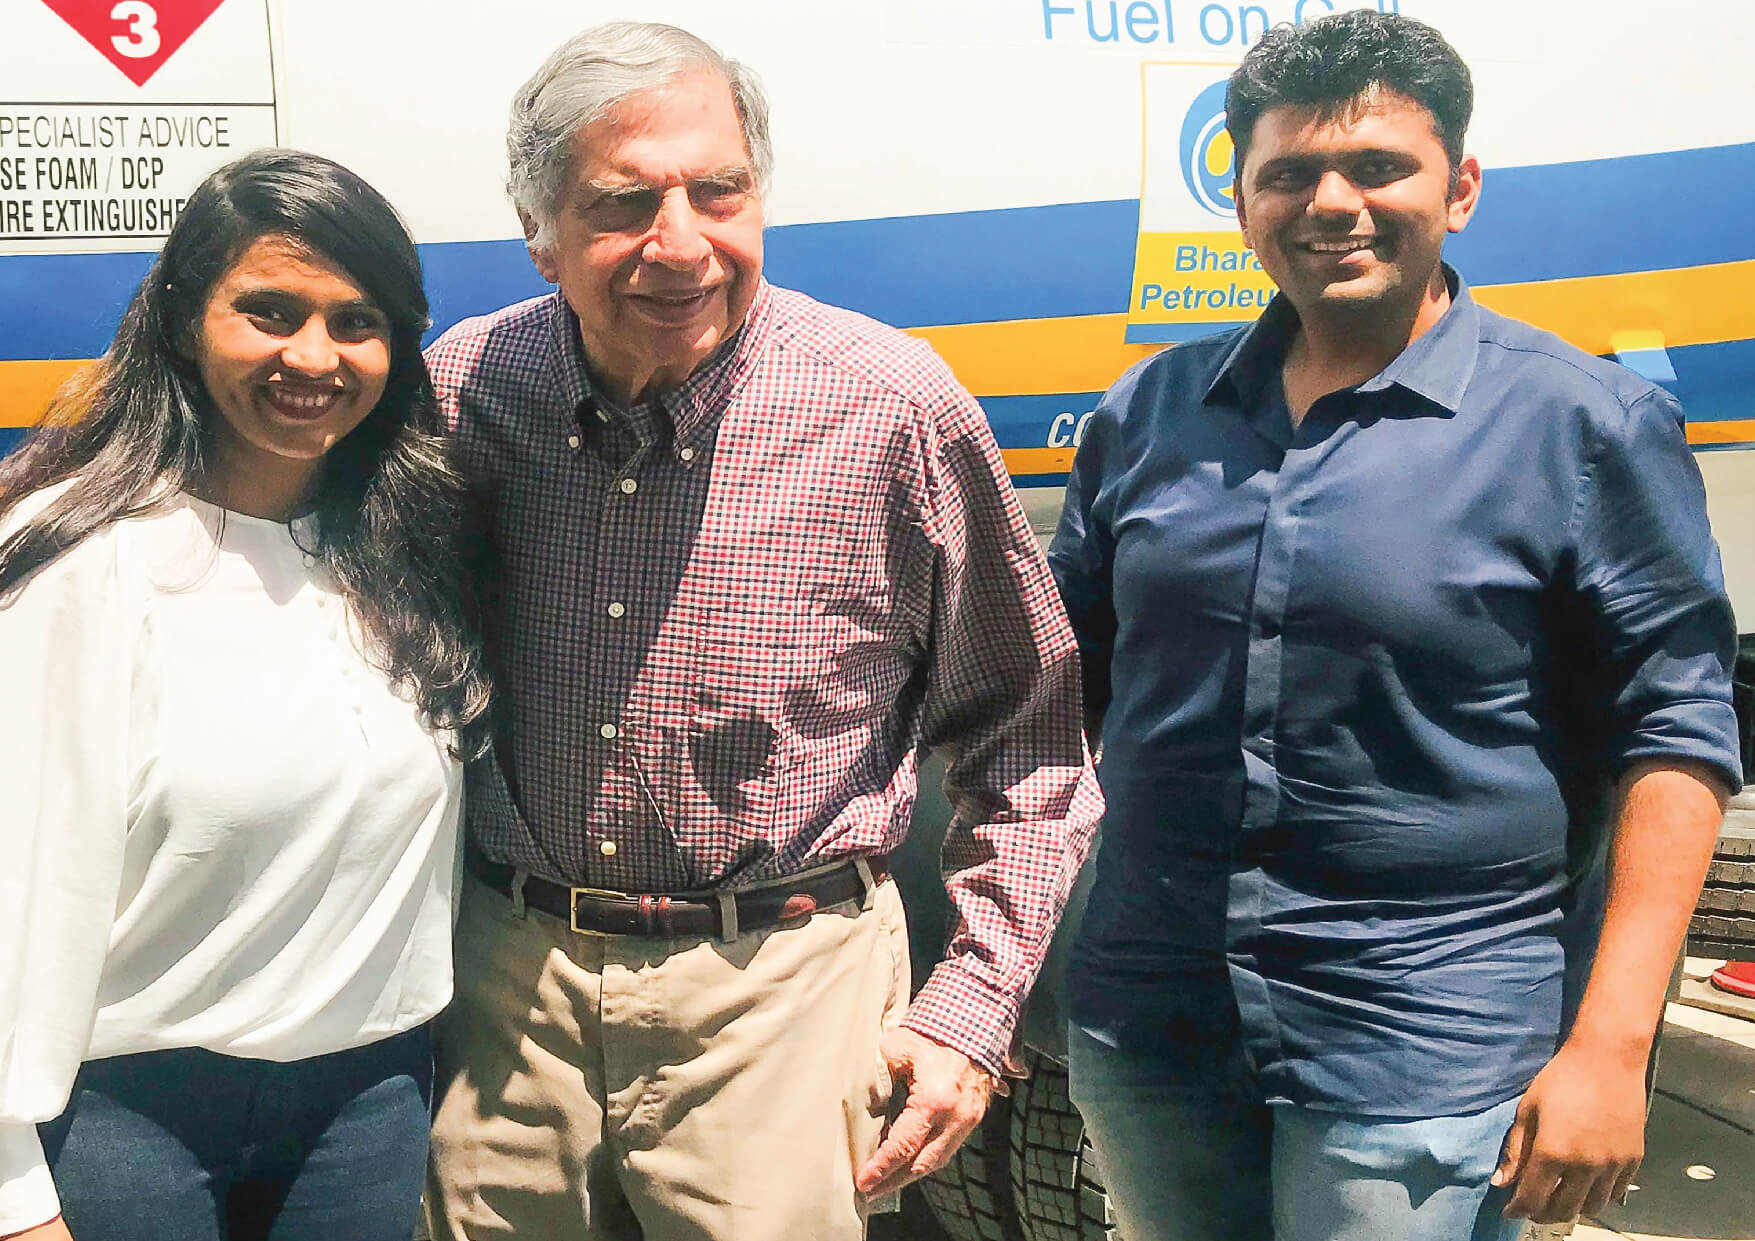 Mr Ratan Tata guiding us was an amazing encouragement for Repos and its vision.